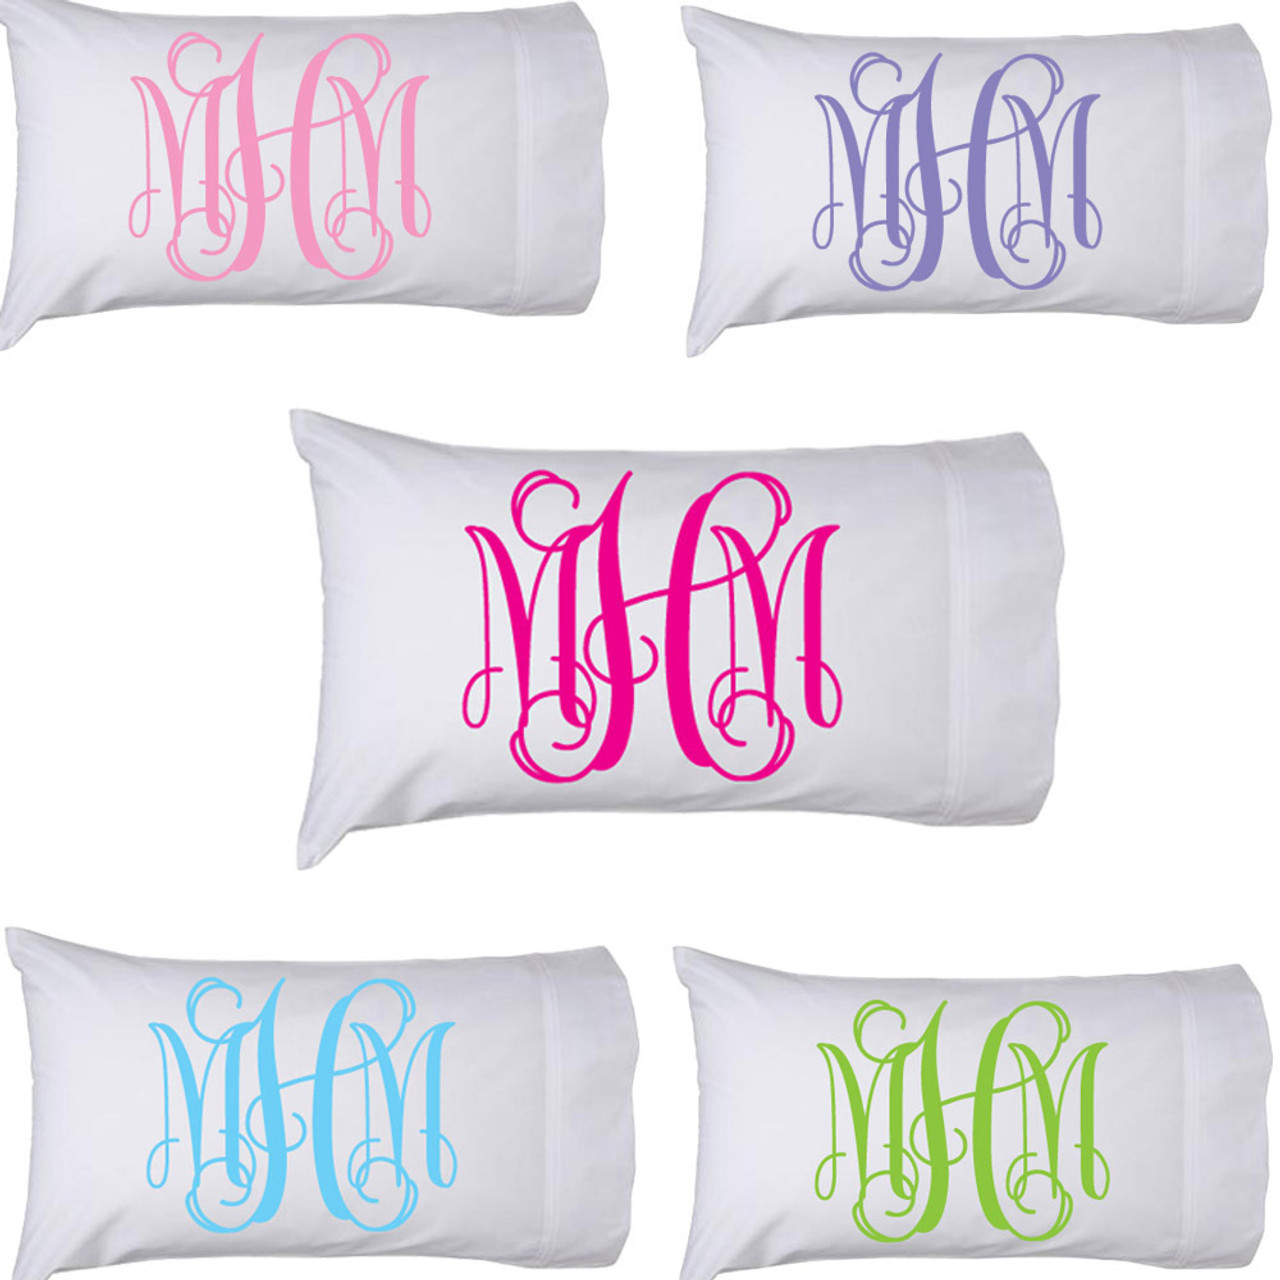 Personalized Pillowcase featuring LEXIS in photo of actual sign letters 